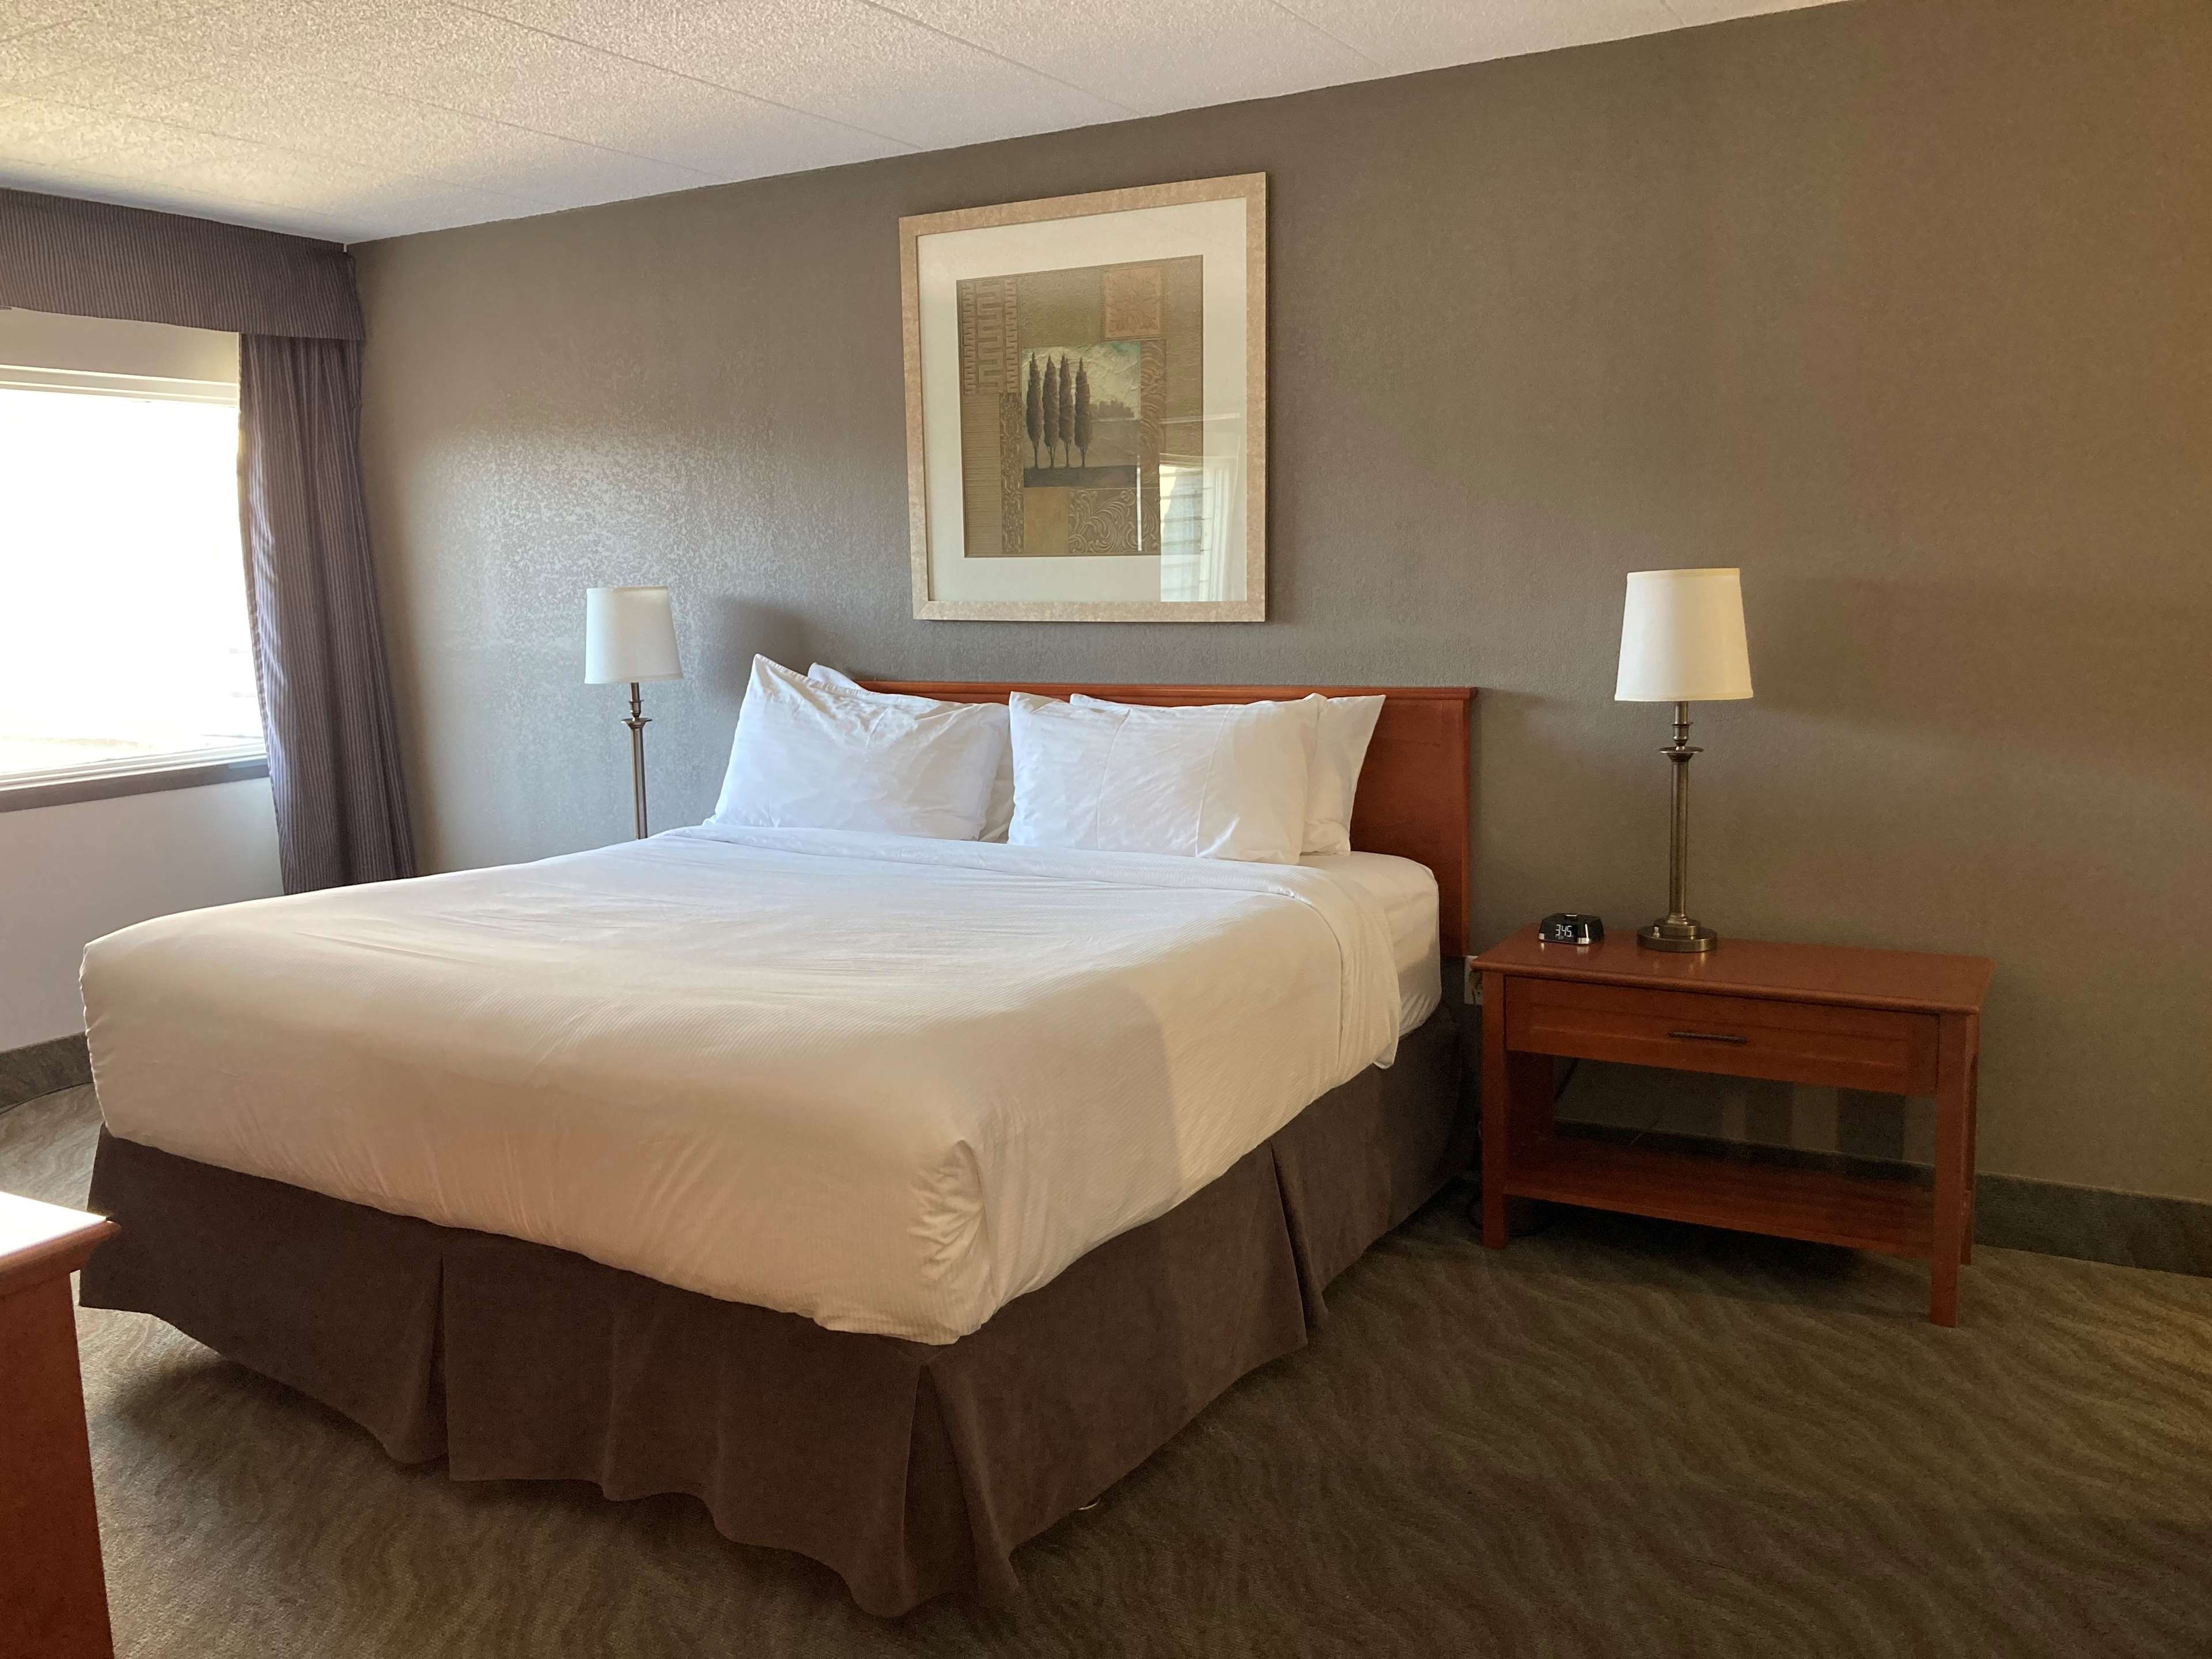 Suite Best Western North Bay Hotel & Conference Centre North Bay (705)474-5800